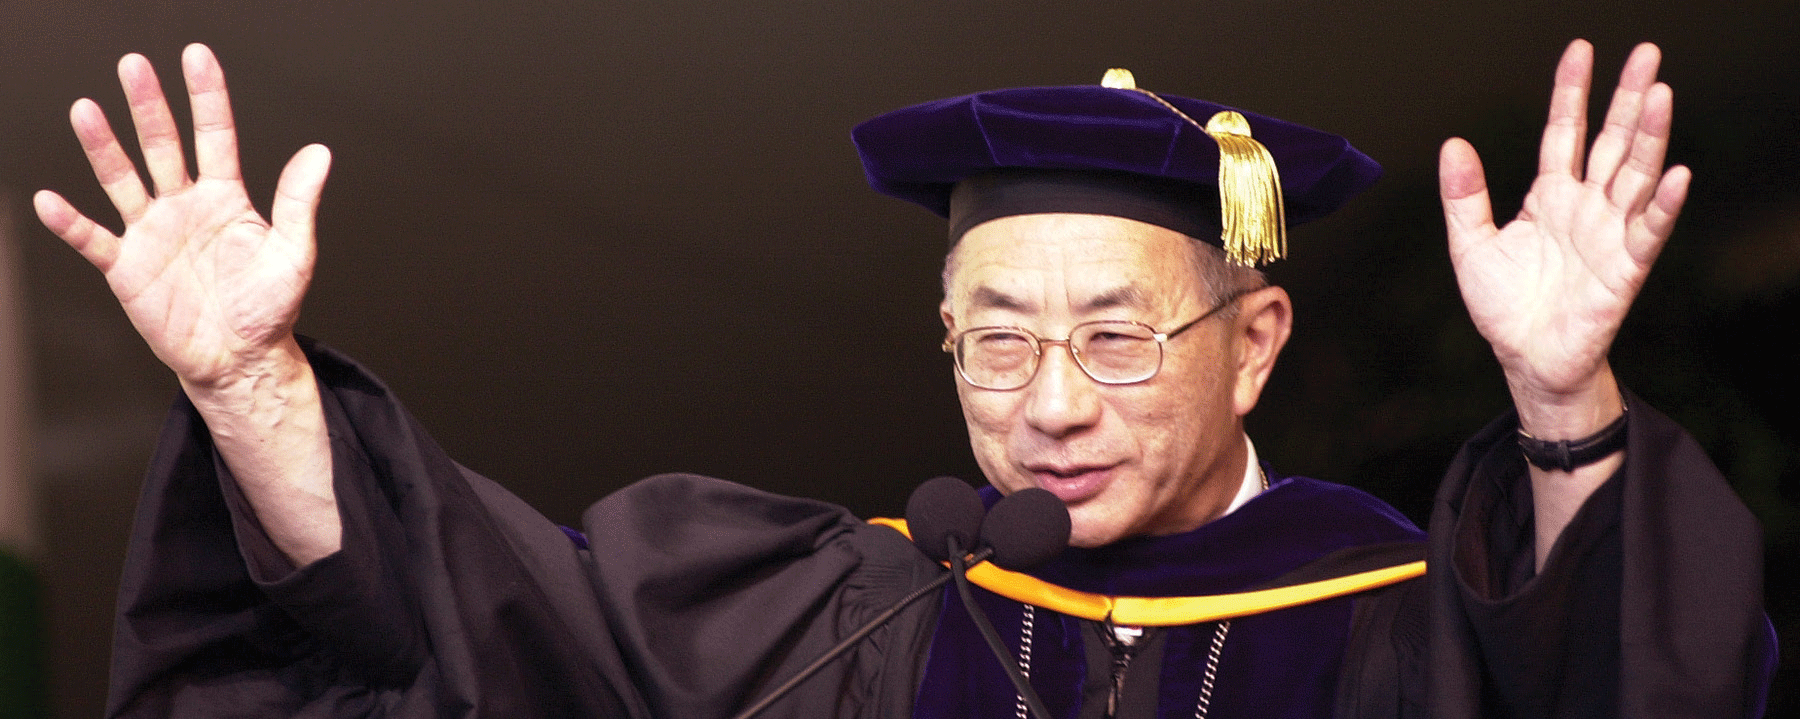 Bob Suzuki waves during a commencement ceremony.